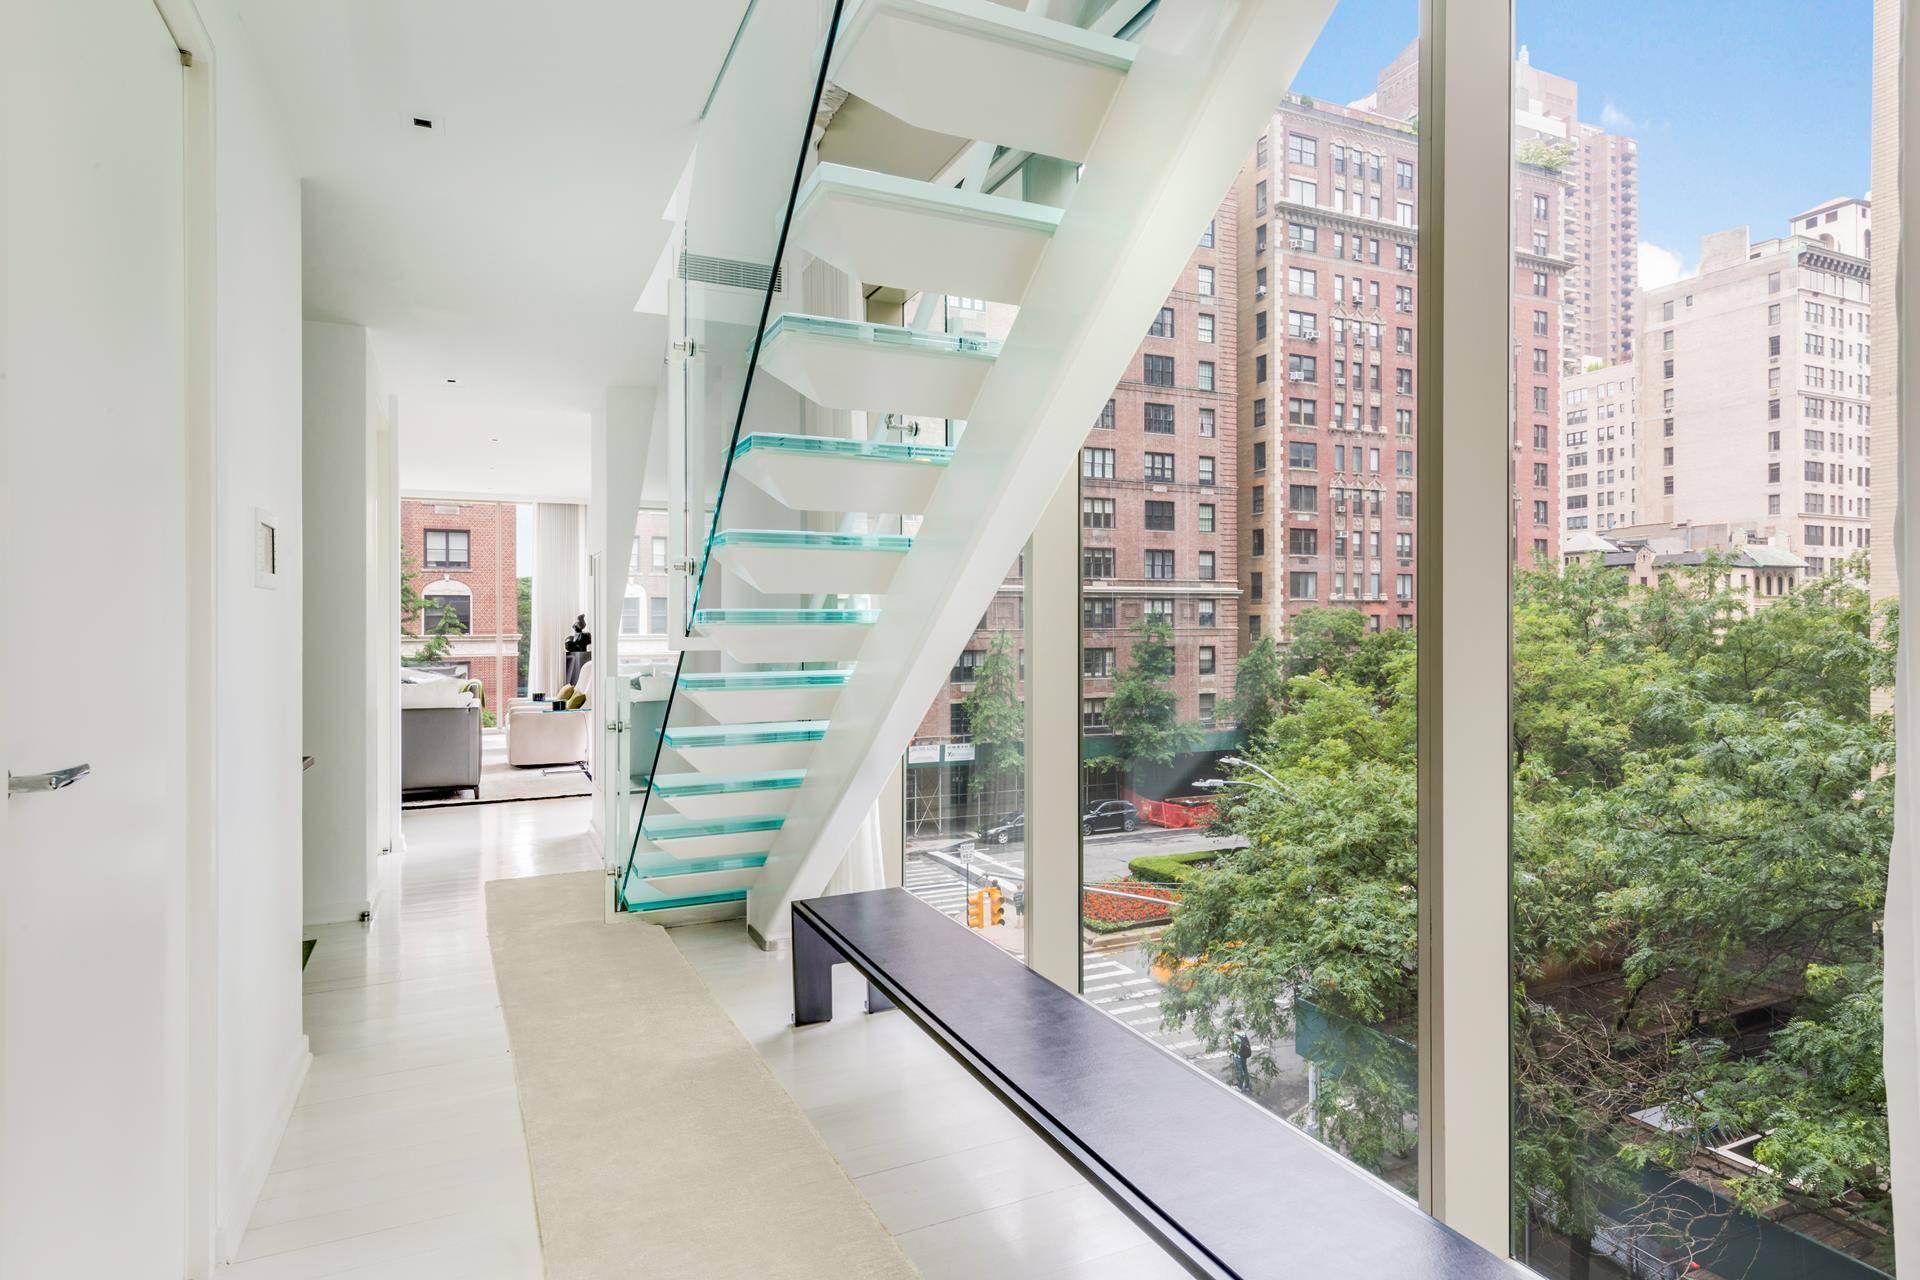 Virtual Tour available upon request Welcome to corner Residence 2, occupying the complete 4th amp ; 5th floors at 1055 Park Avenue, as featured in Architectural Digest.